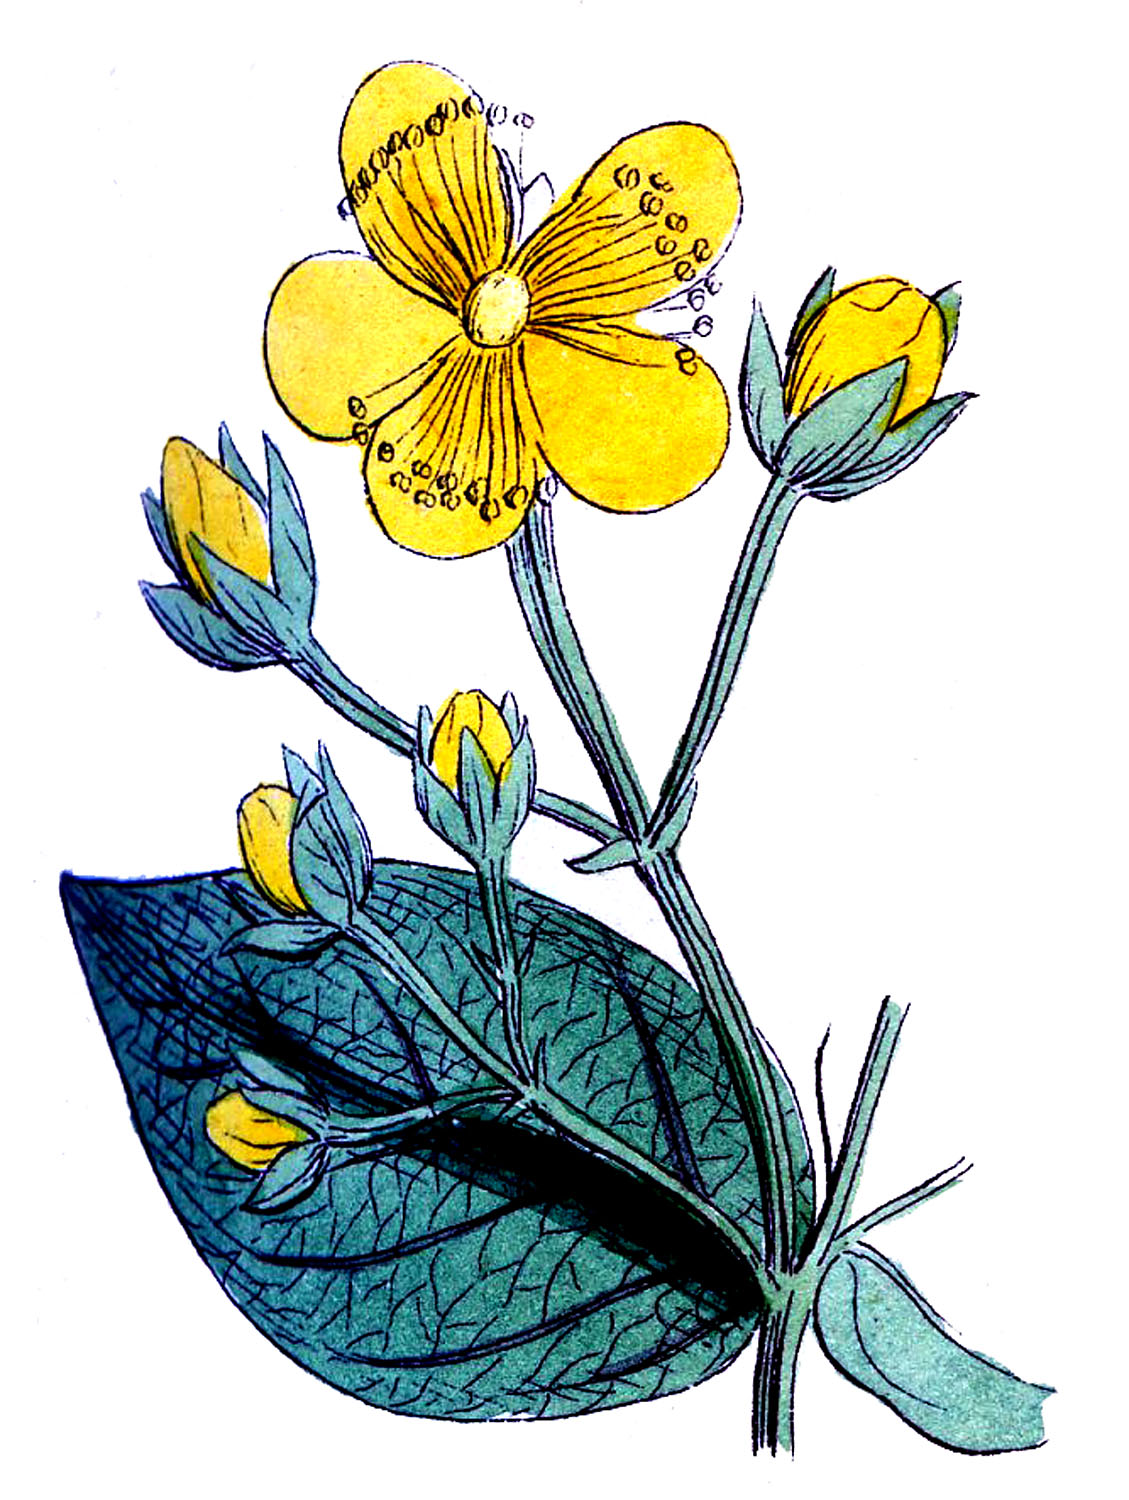 Vintage Botanical Images - Bright Yellow Flowers - The ...